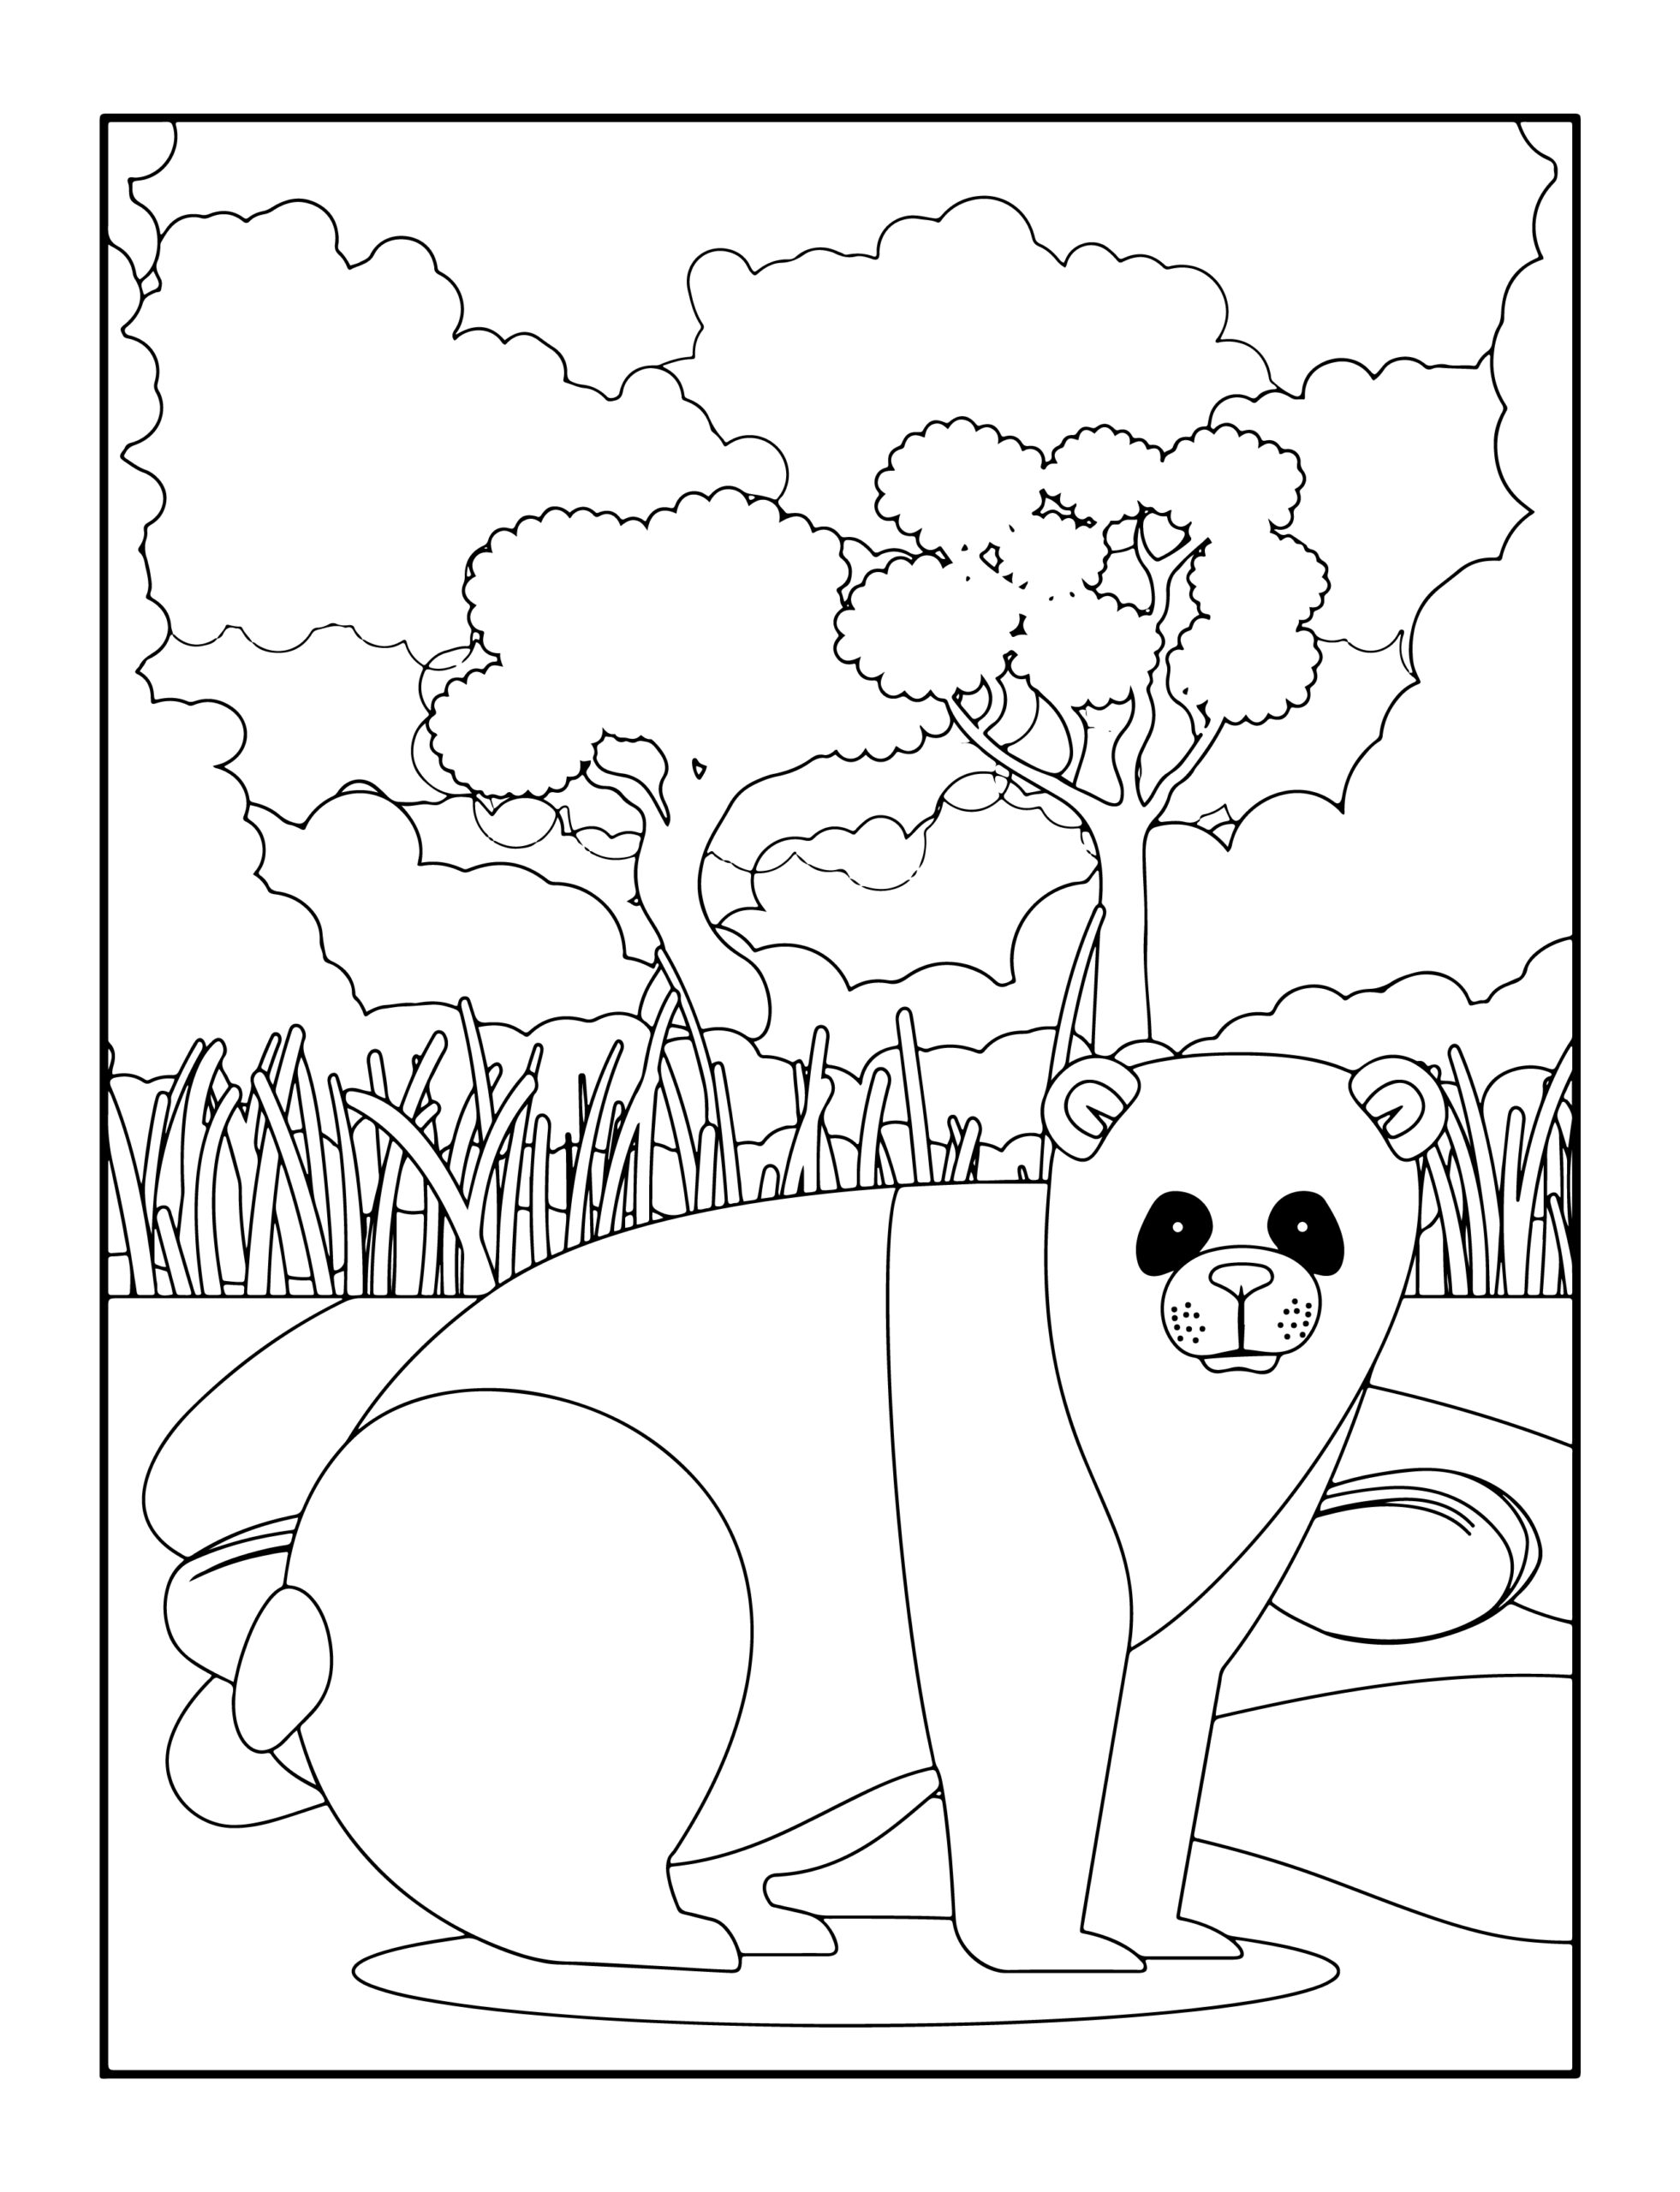 Cute and cuddly panda coloring pages for kids of all ages made by teachers